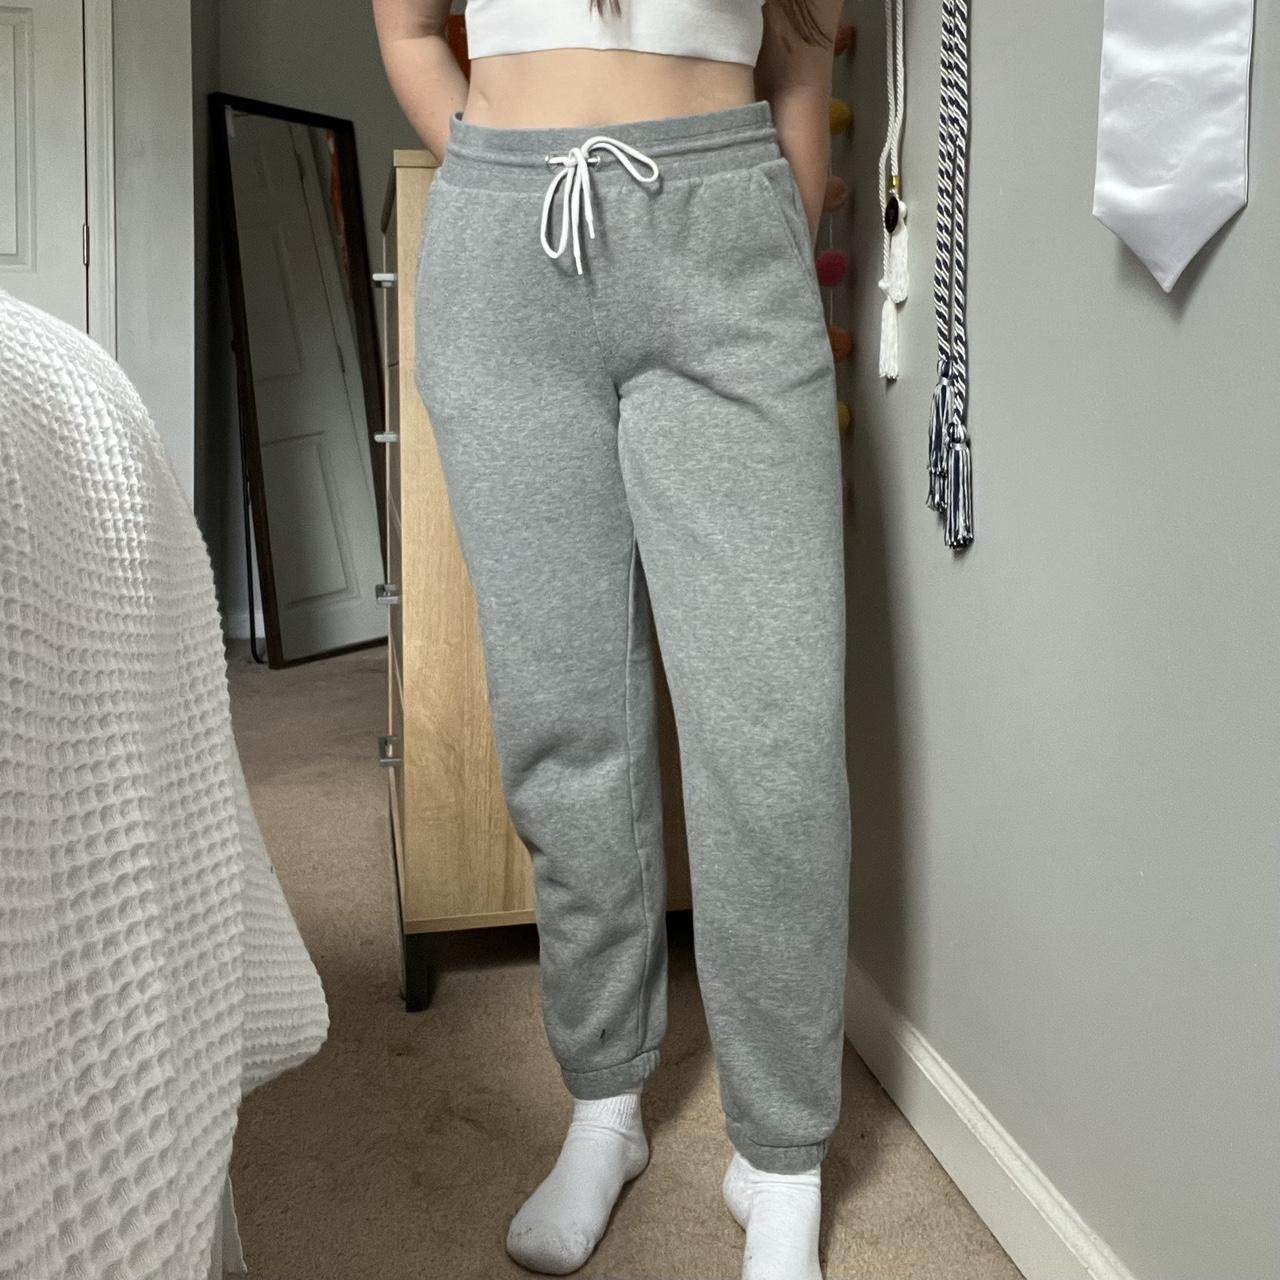 grey fleece sweatpants by wild fable from target.